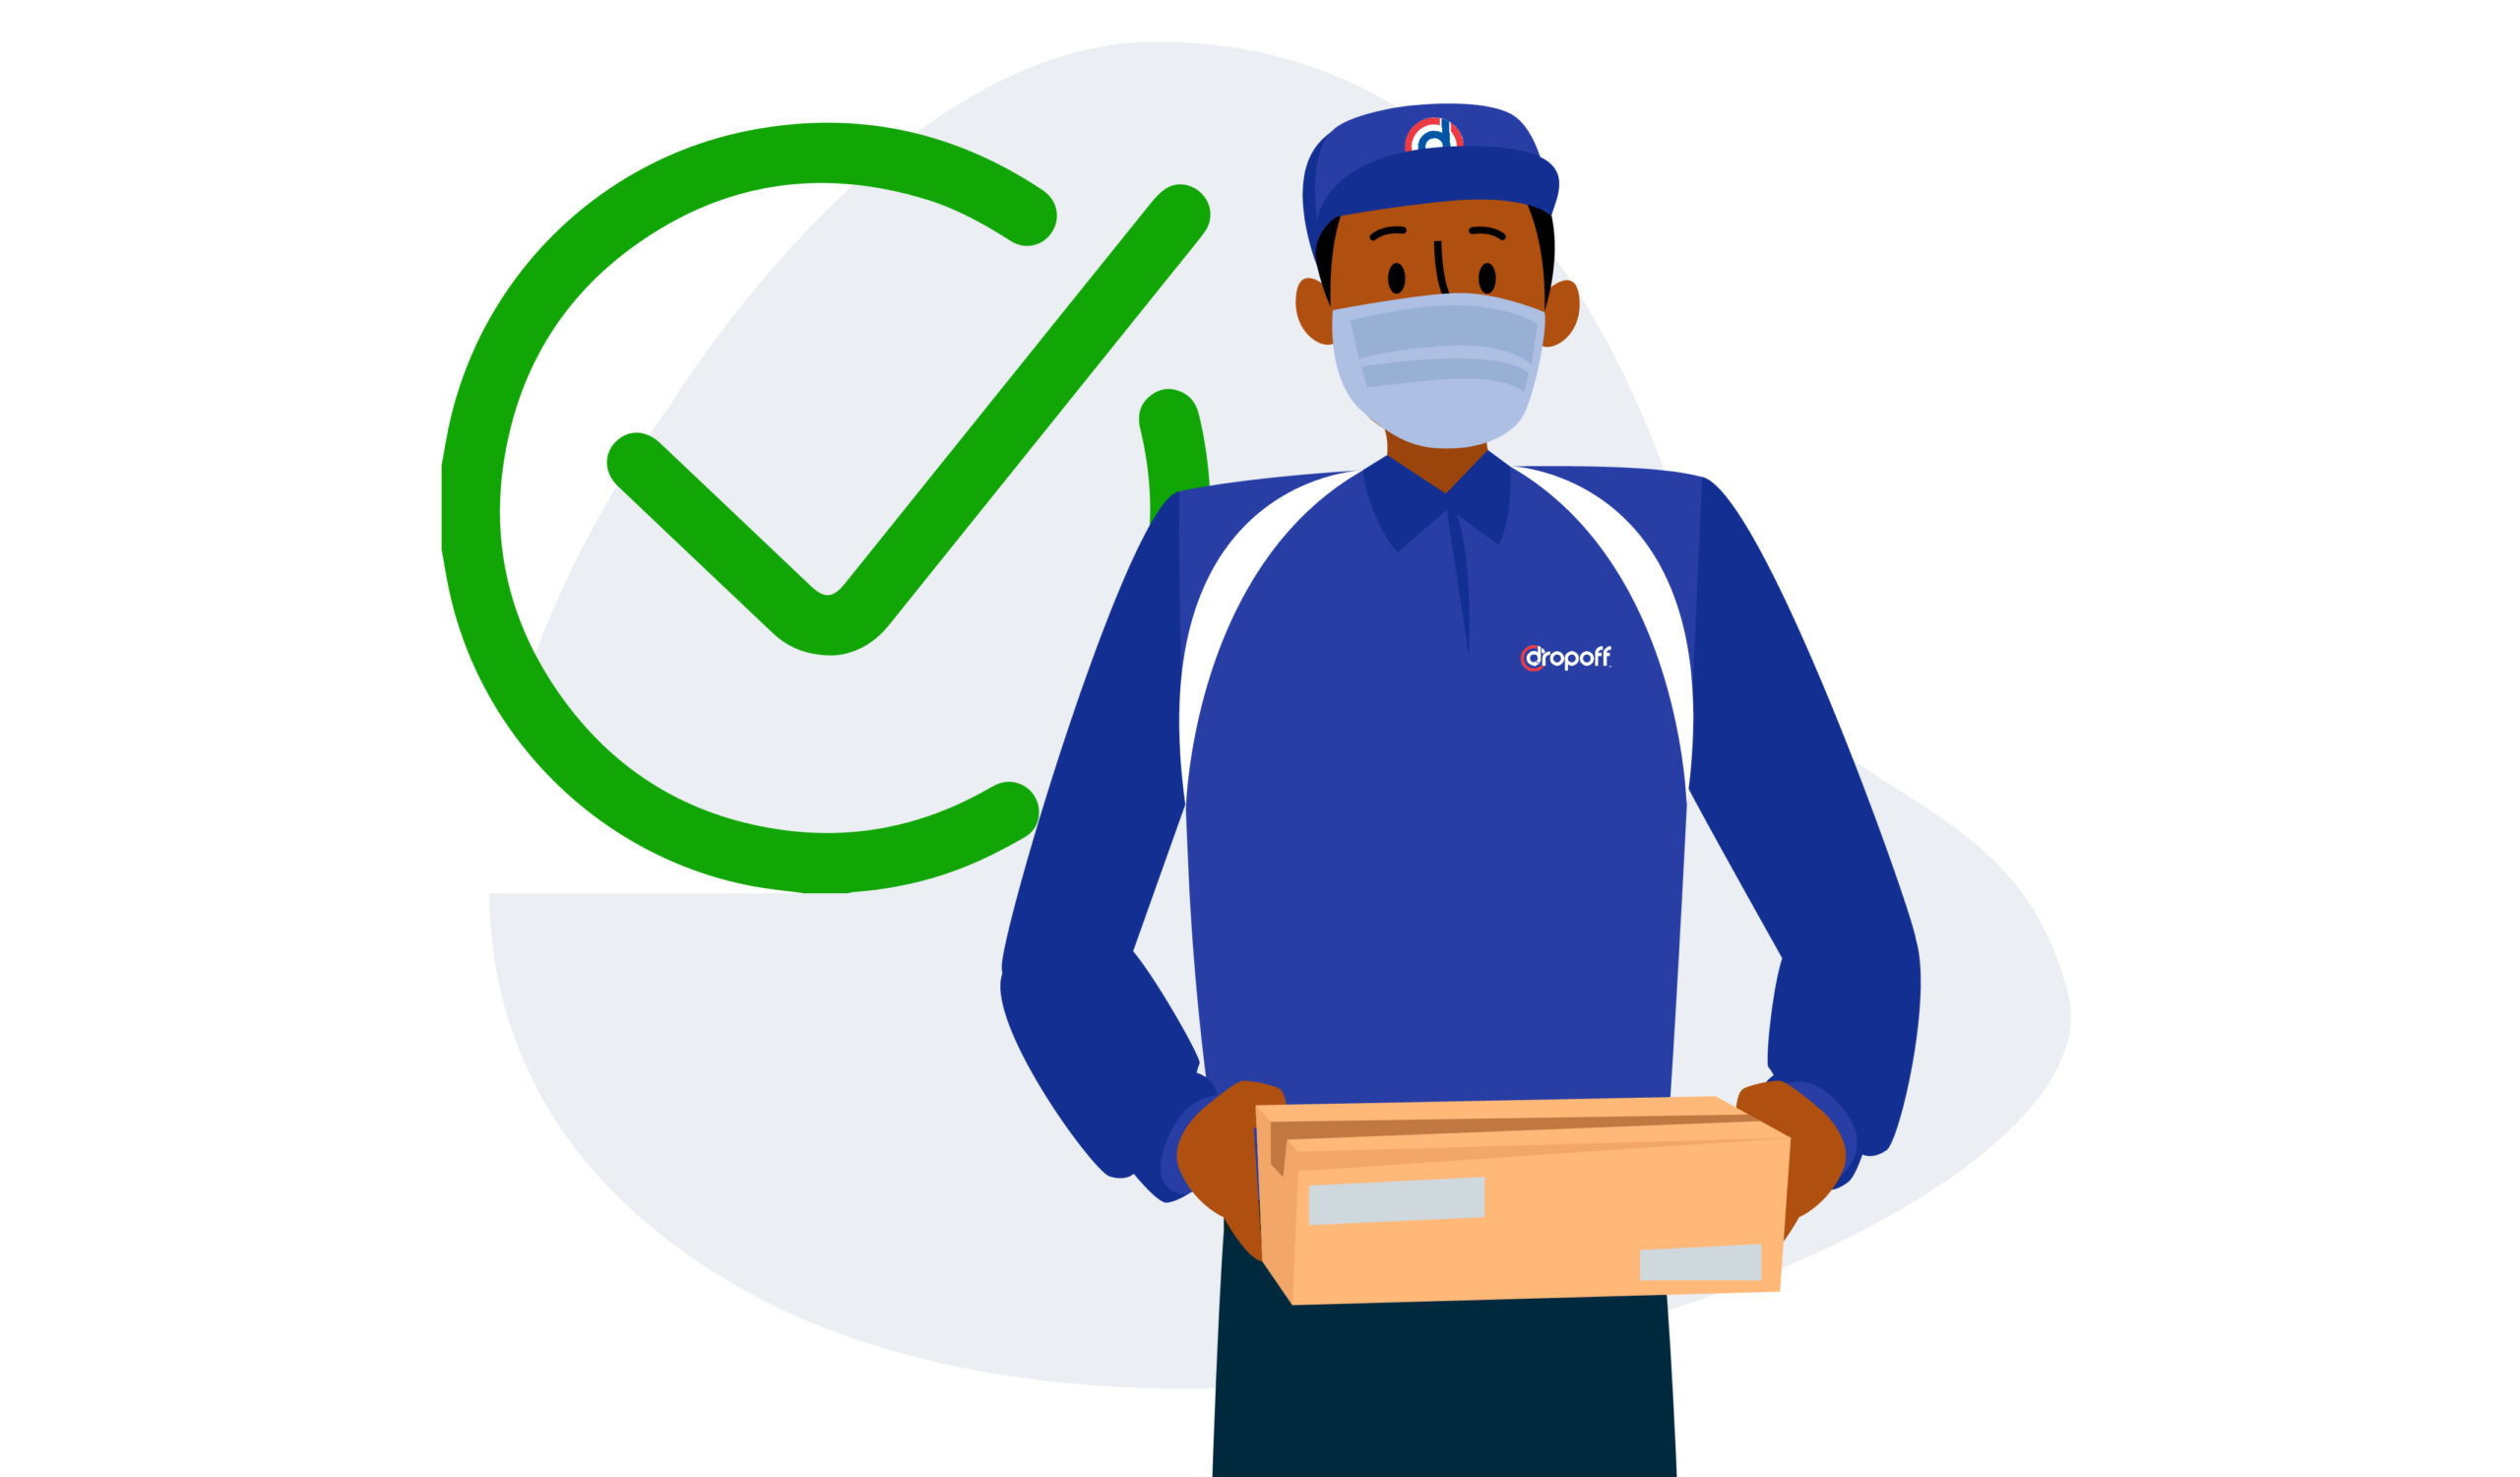 How to Become a Medical Courier - Dropoff